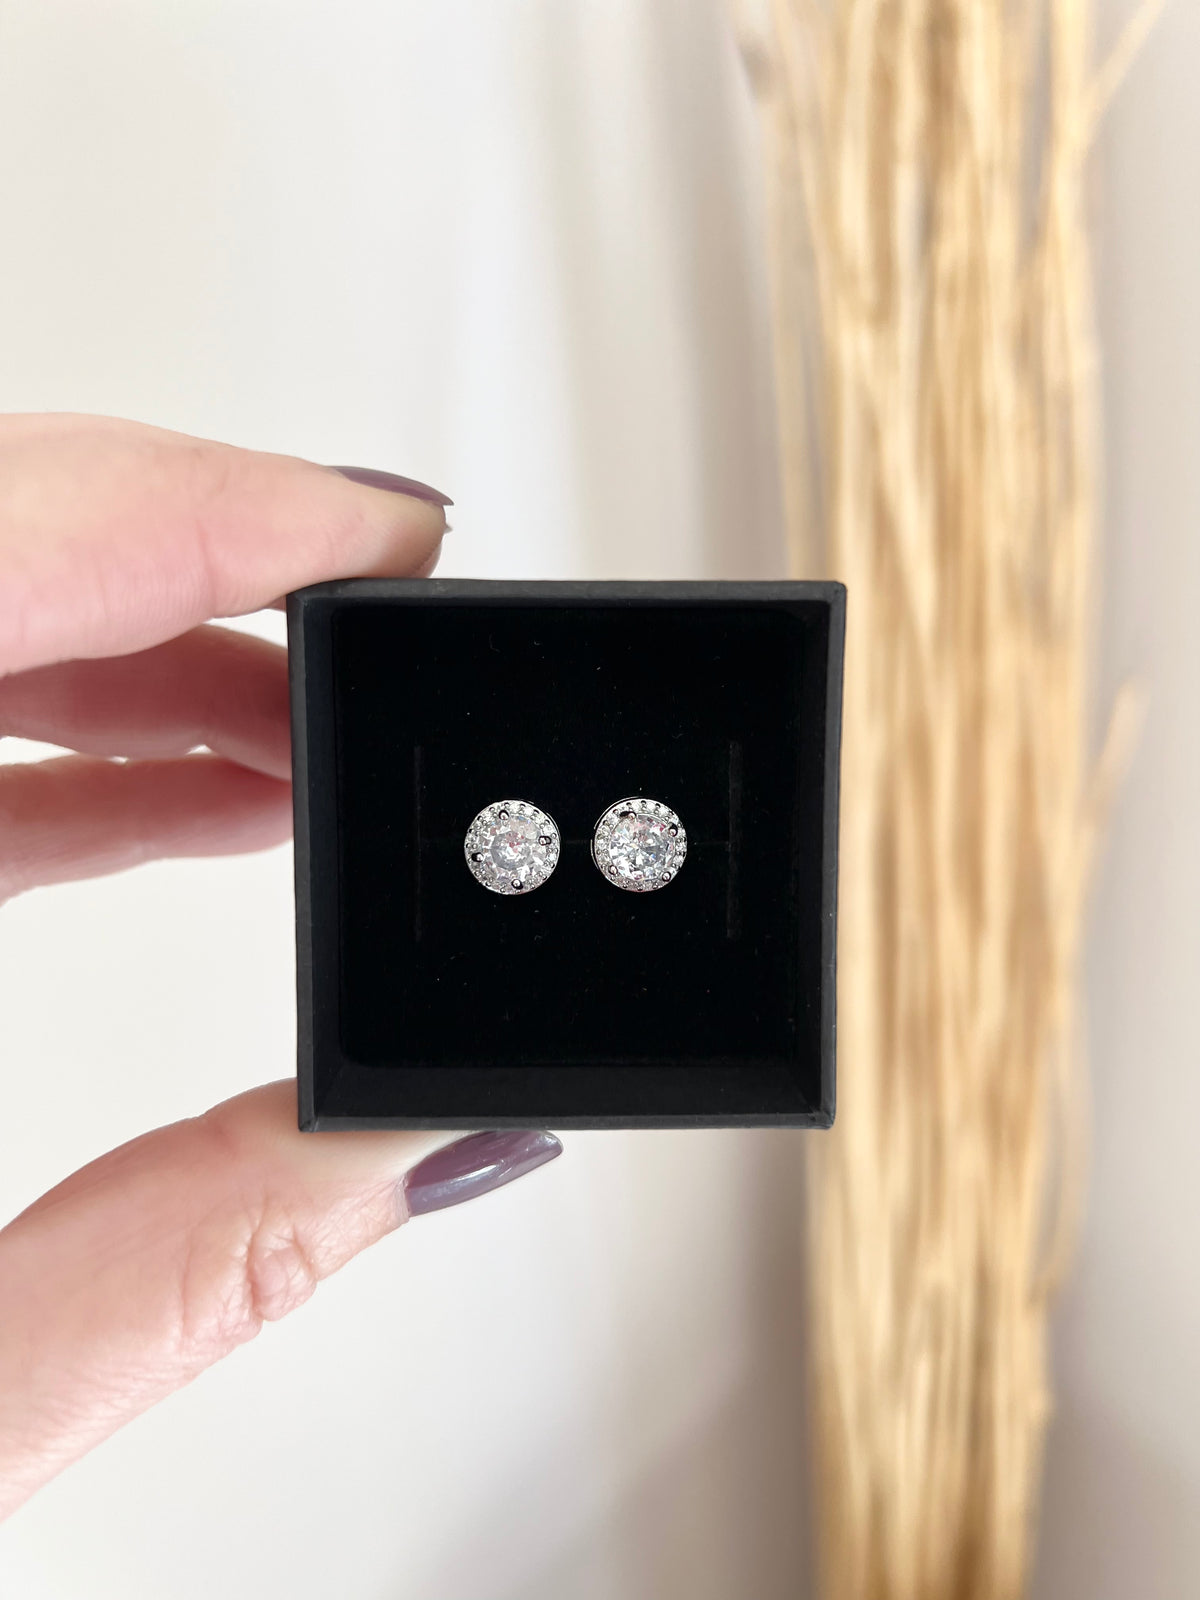 Moissanite Stud Earrings | Round or Square Cushion Halo Setting | Material: 925 sterling silver rhodium-plated | Length: 1.25" | Solitaire: 2 carat (1 carat per earring) | Weight: 0.2 oz (6 g) for set